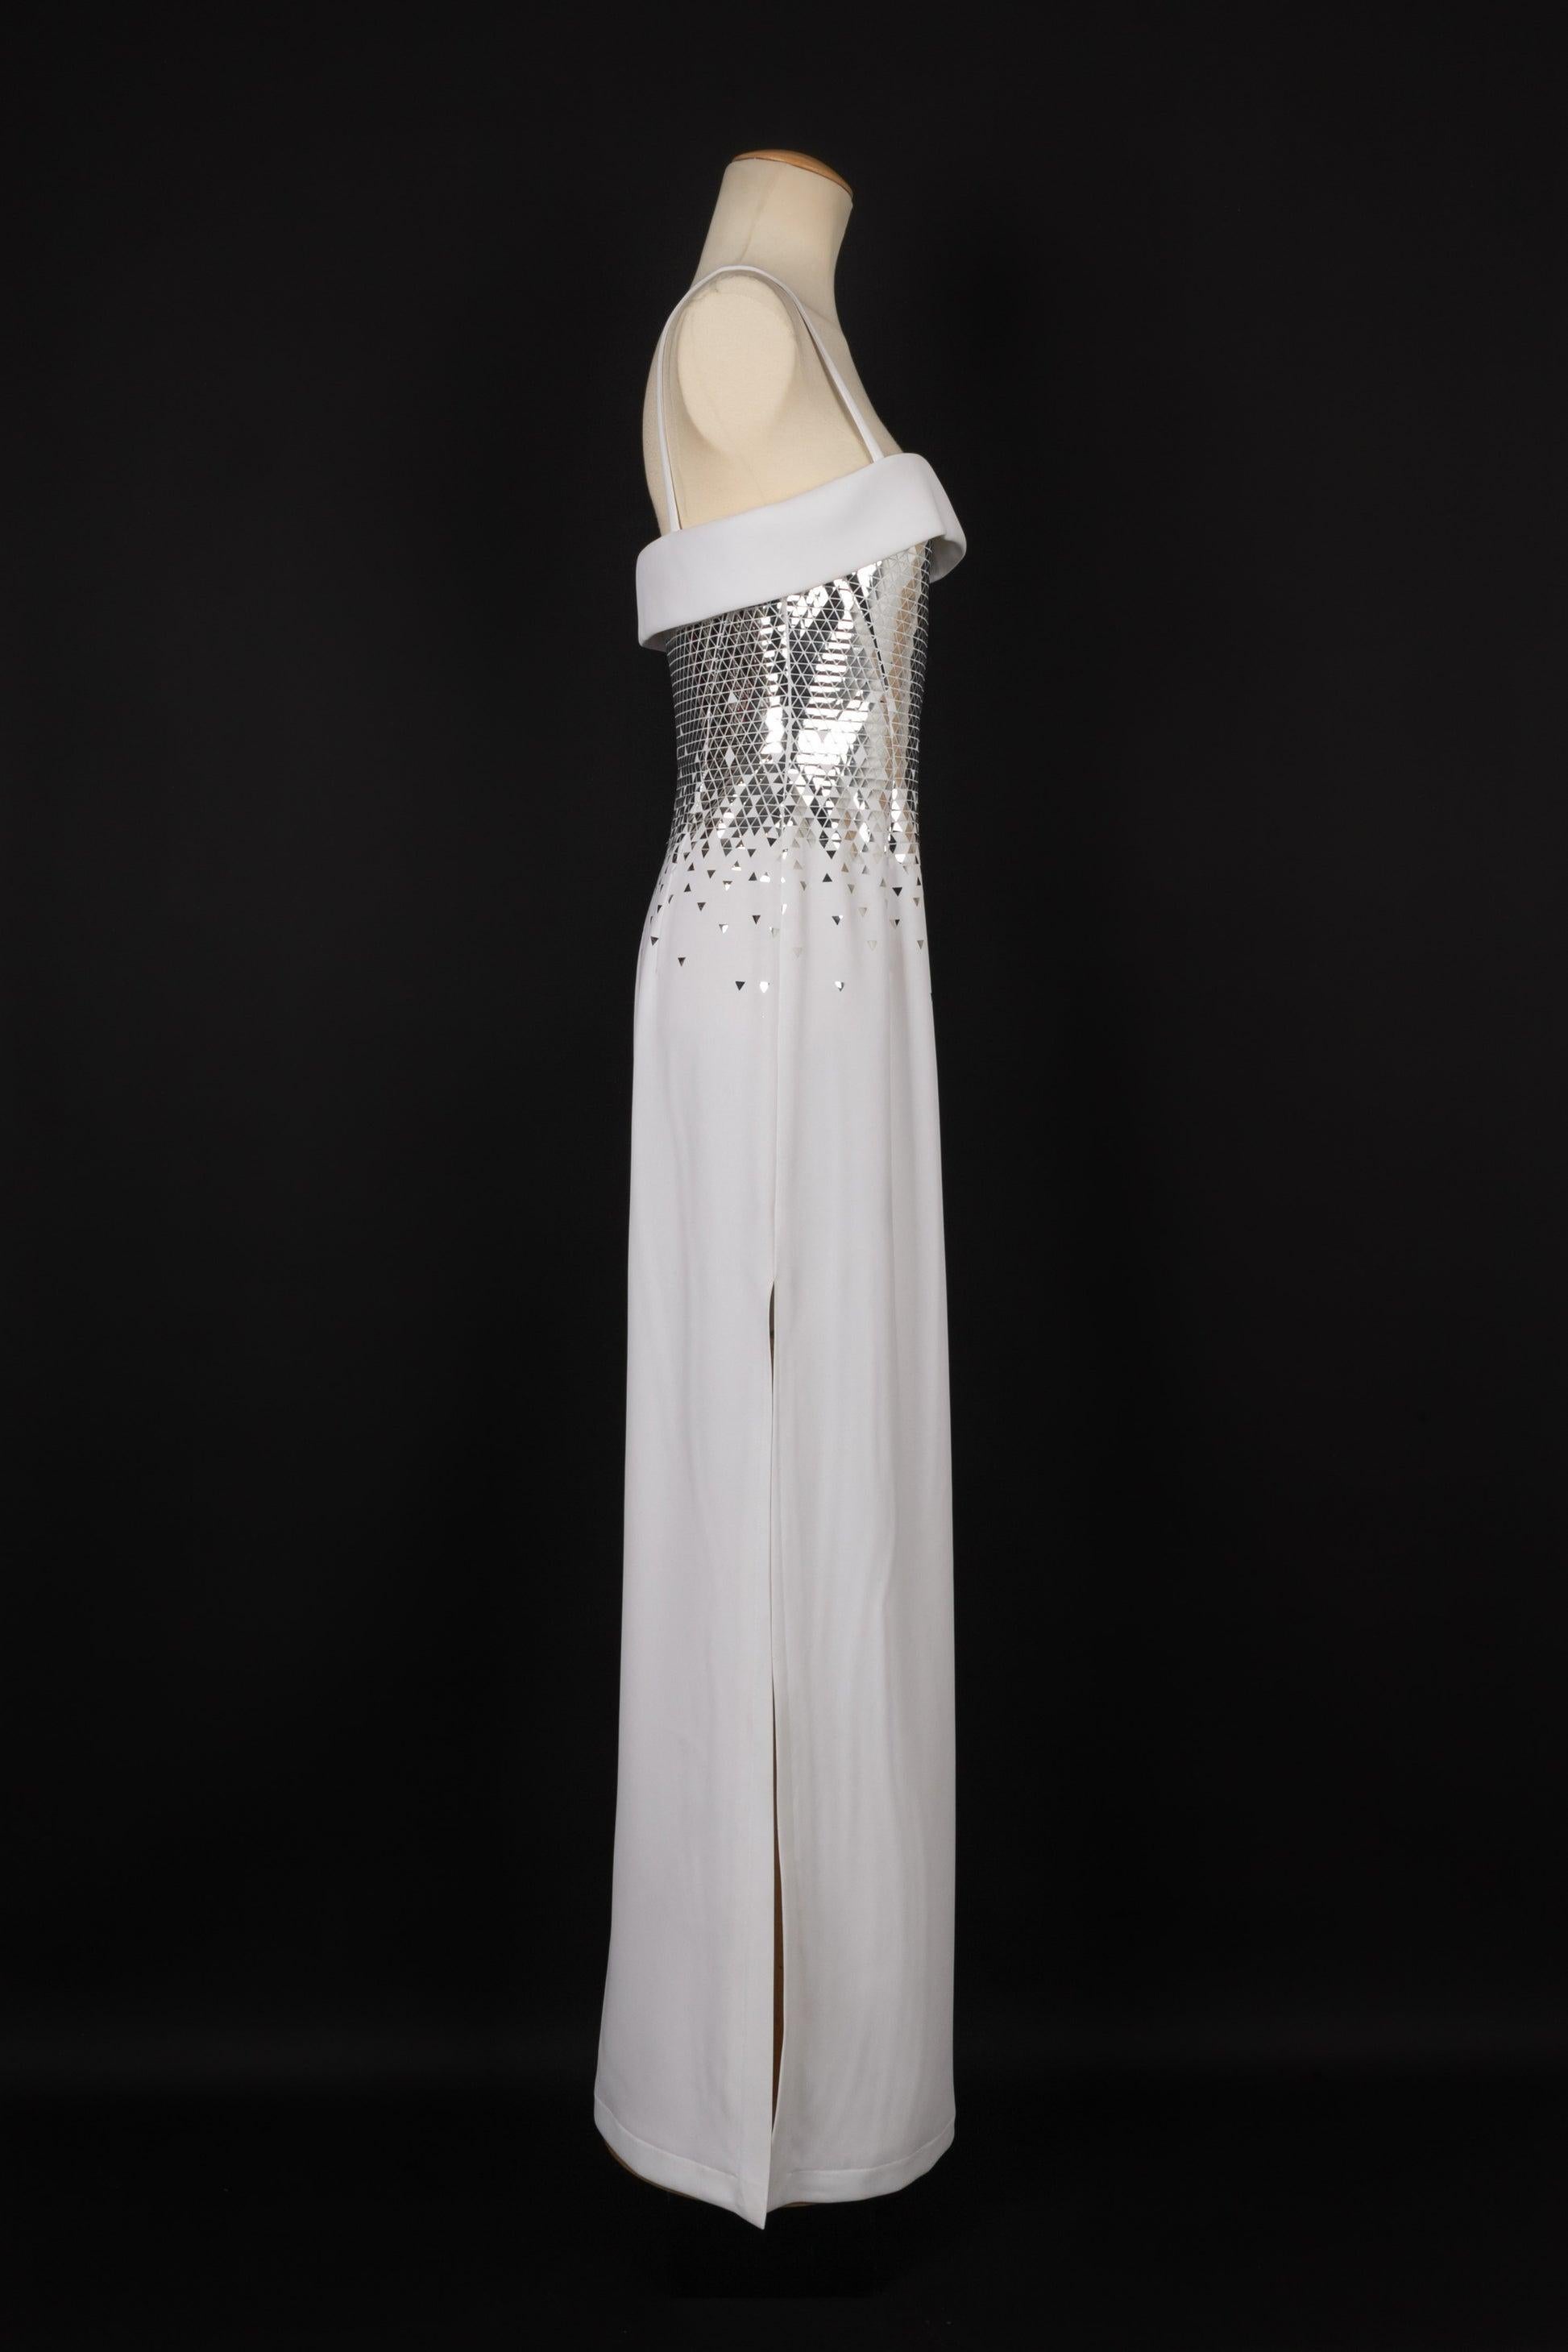 Mugler -(Made in France) White crepe Couture dress with pearlized cascading ornaments. Indicated size 40FR.

Additional information:
Condition: Very good condition
Dimensions: Chest: 44 cm - Waist: 34 cm - Hips: 48 cm - Length: 136 cm

Seller